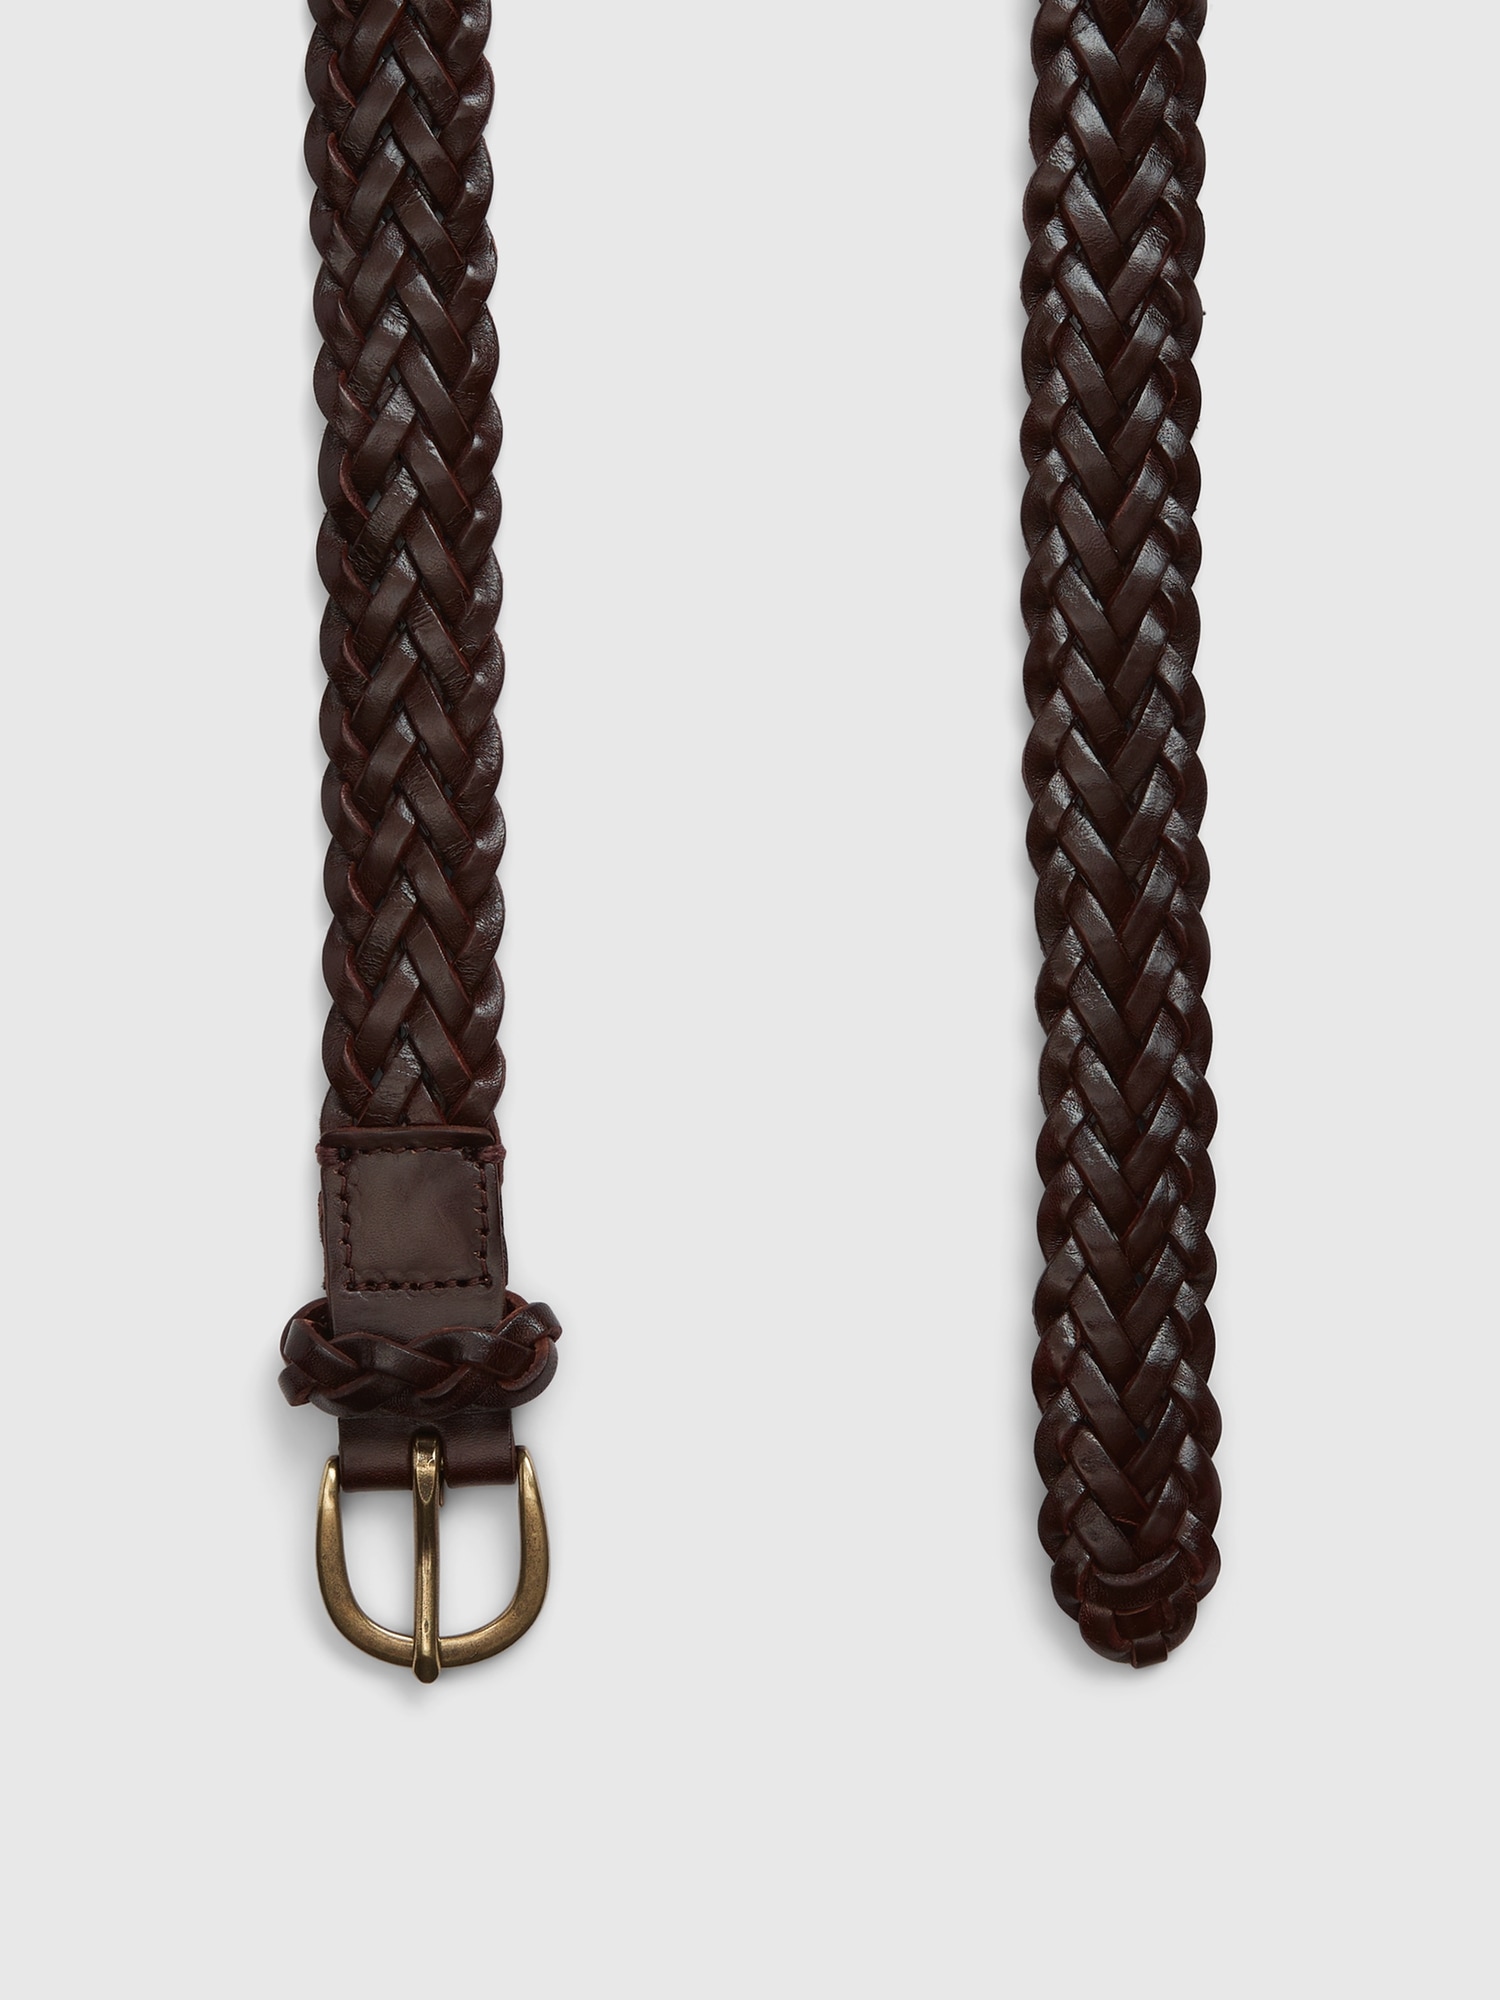 Buy Braided Mens Belt Without Holes - Brown Leather